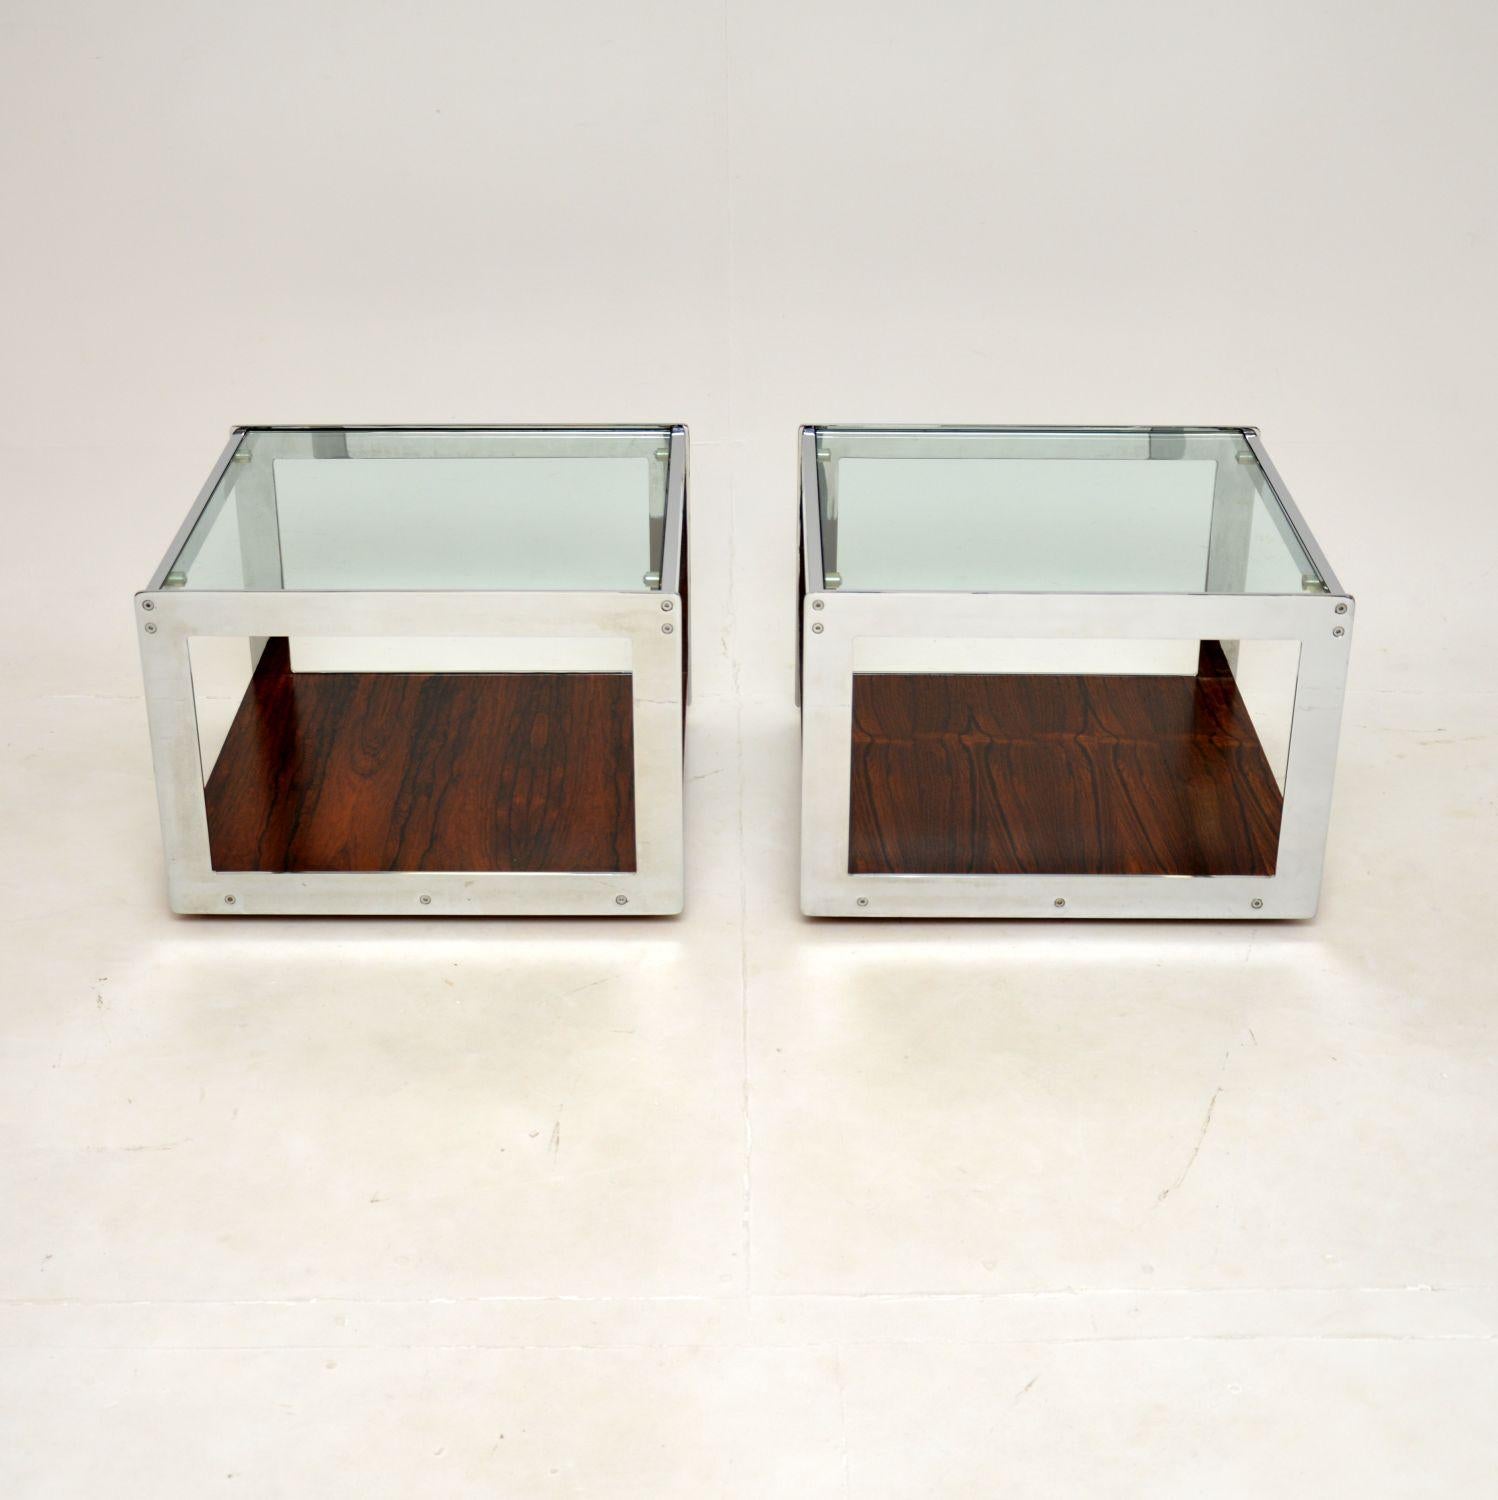 British Pair of Vintage Side Tables by Merrow Associates For Sale